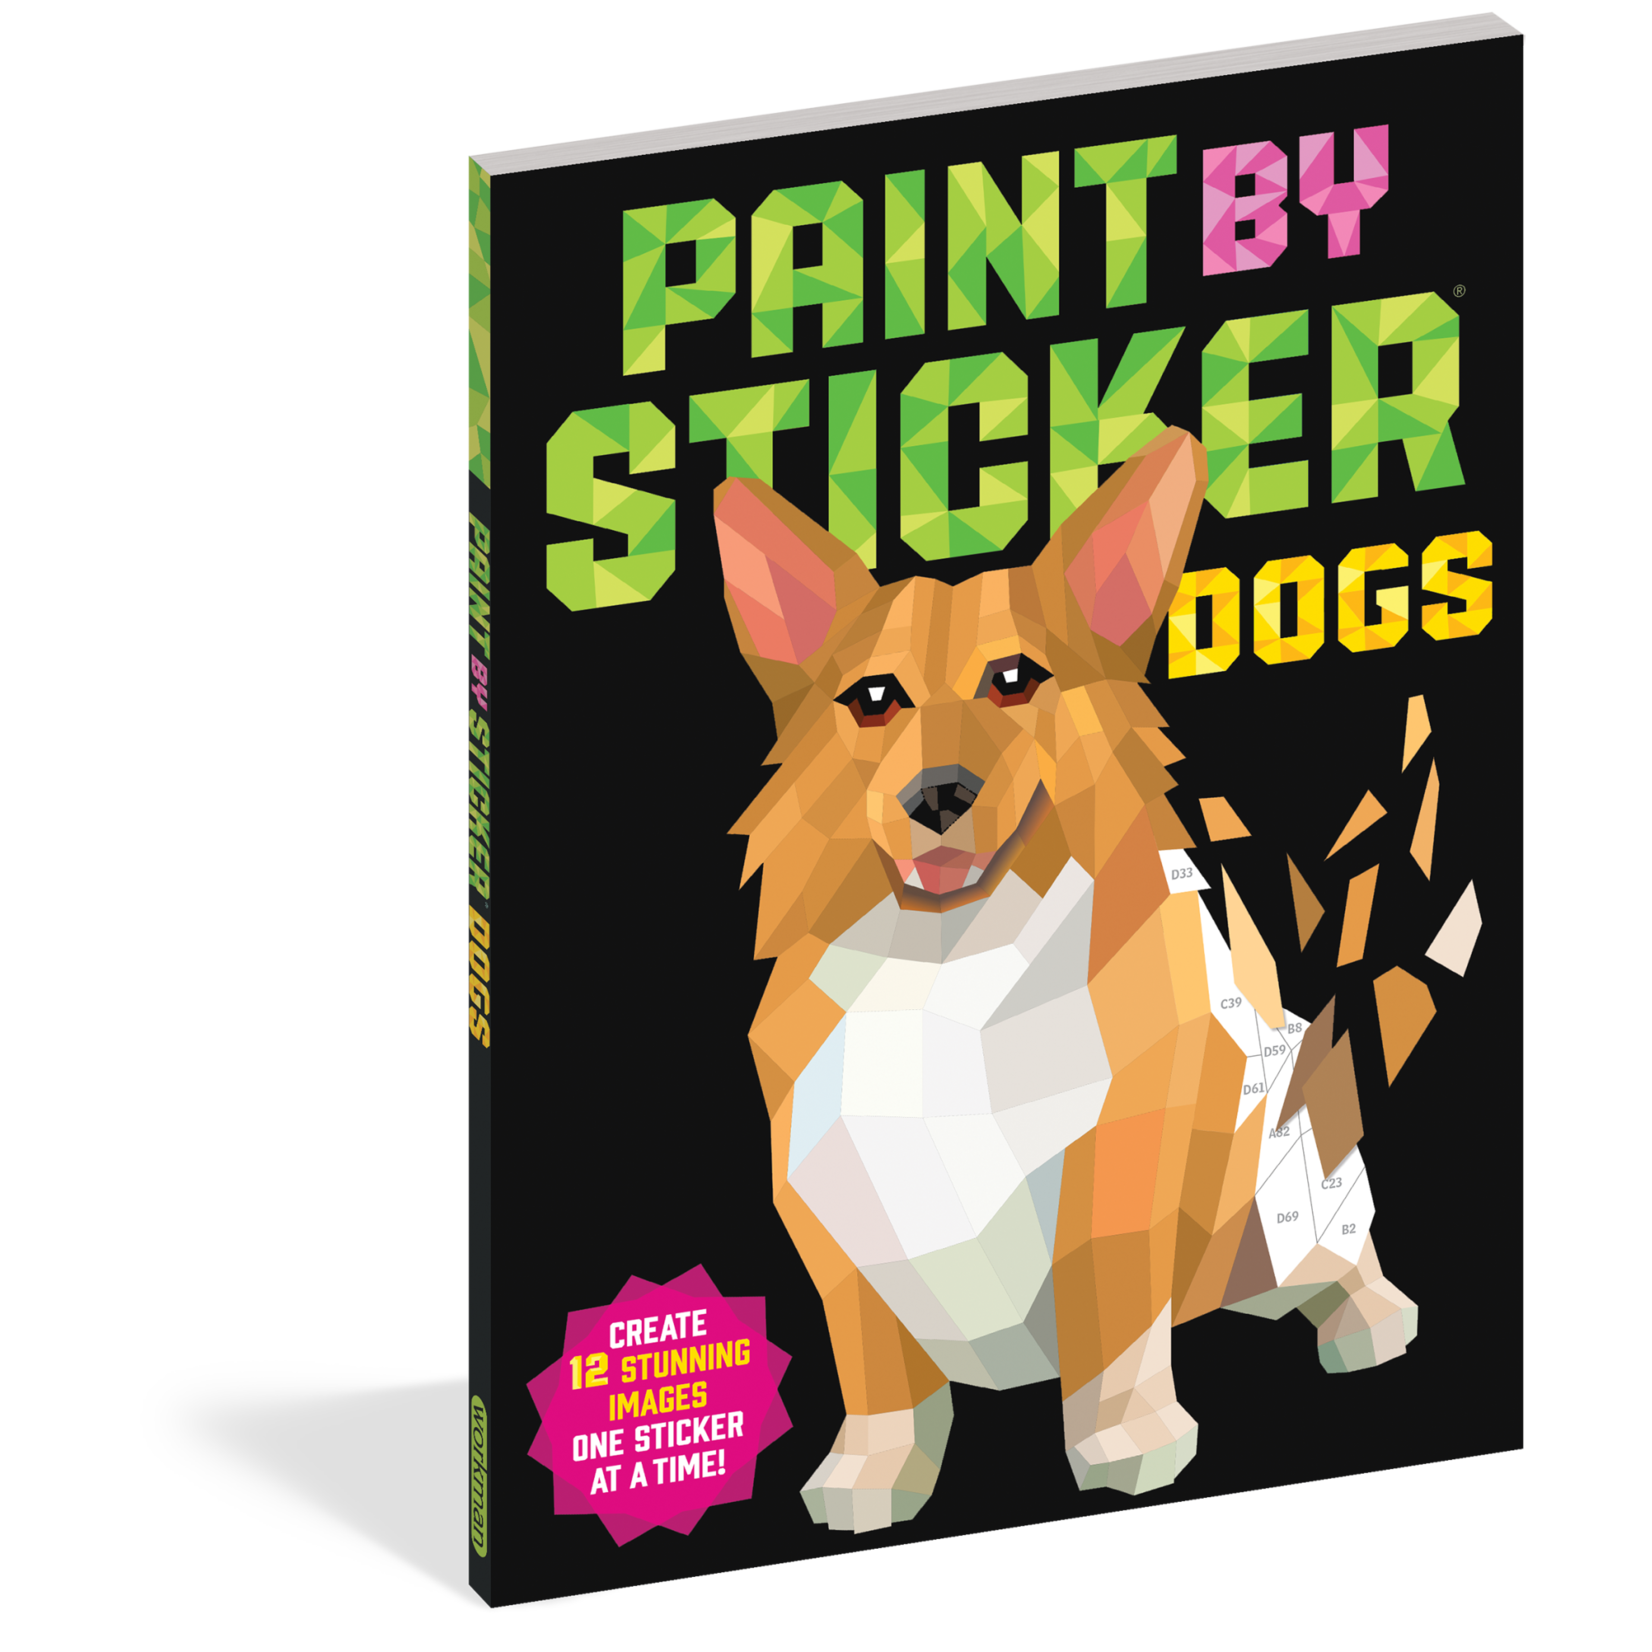 Workman Publishing Paint by Sticker: Dogs